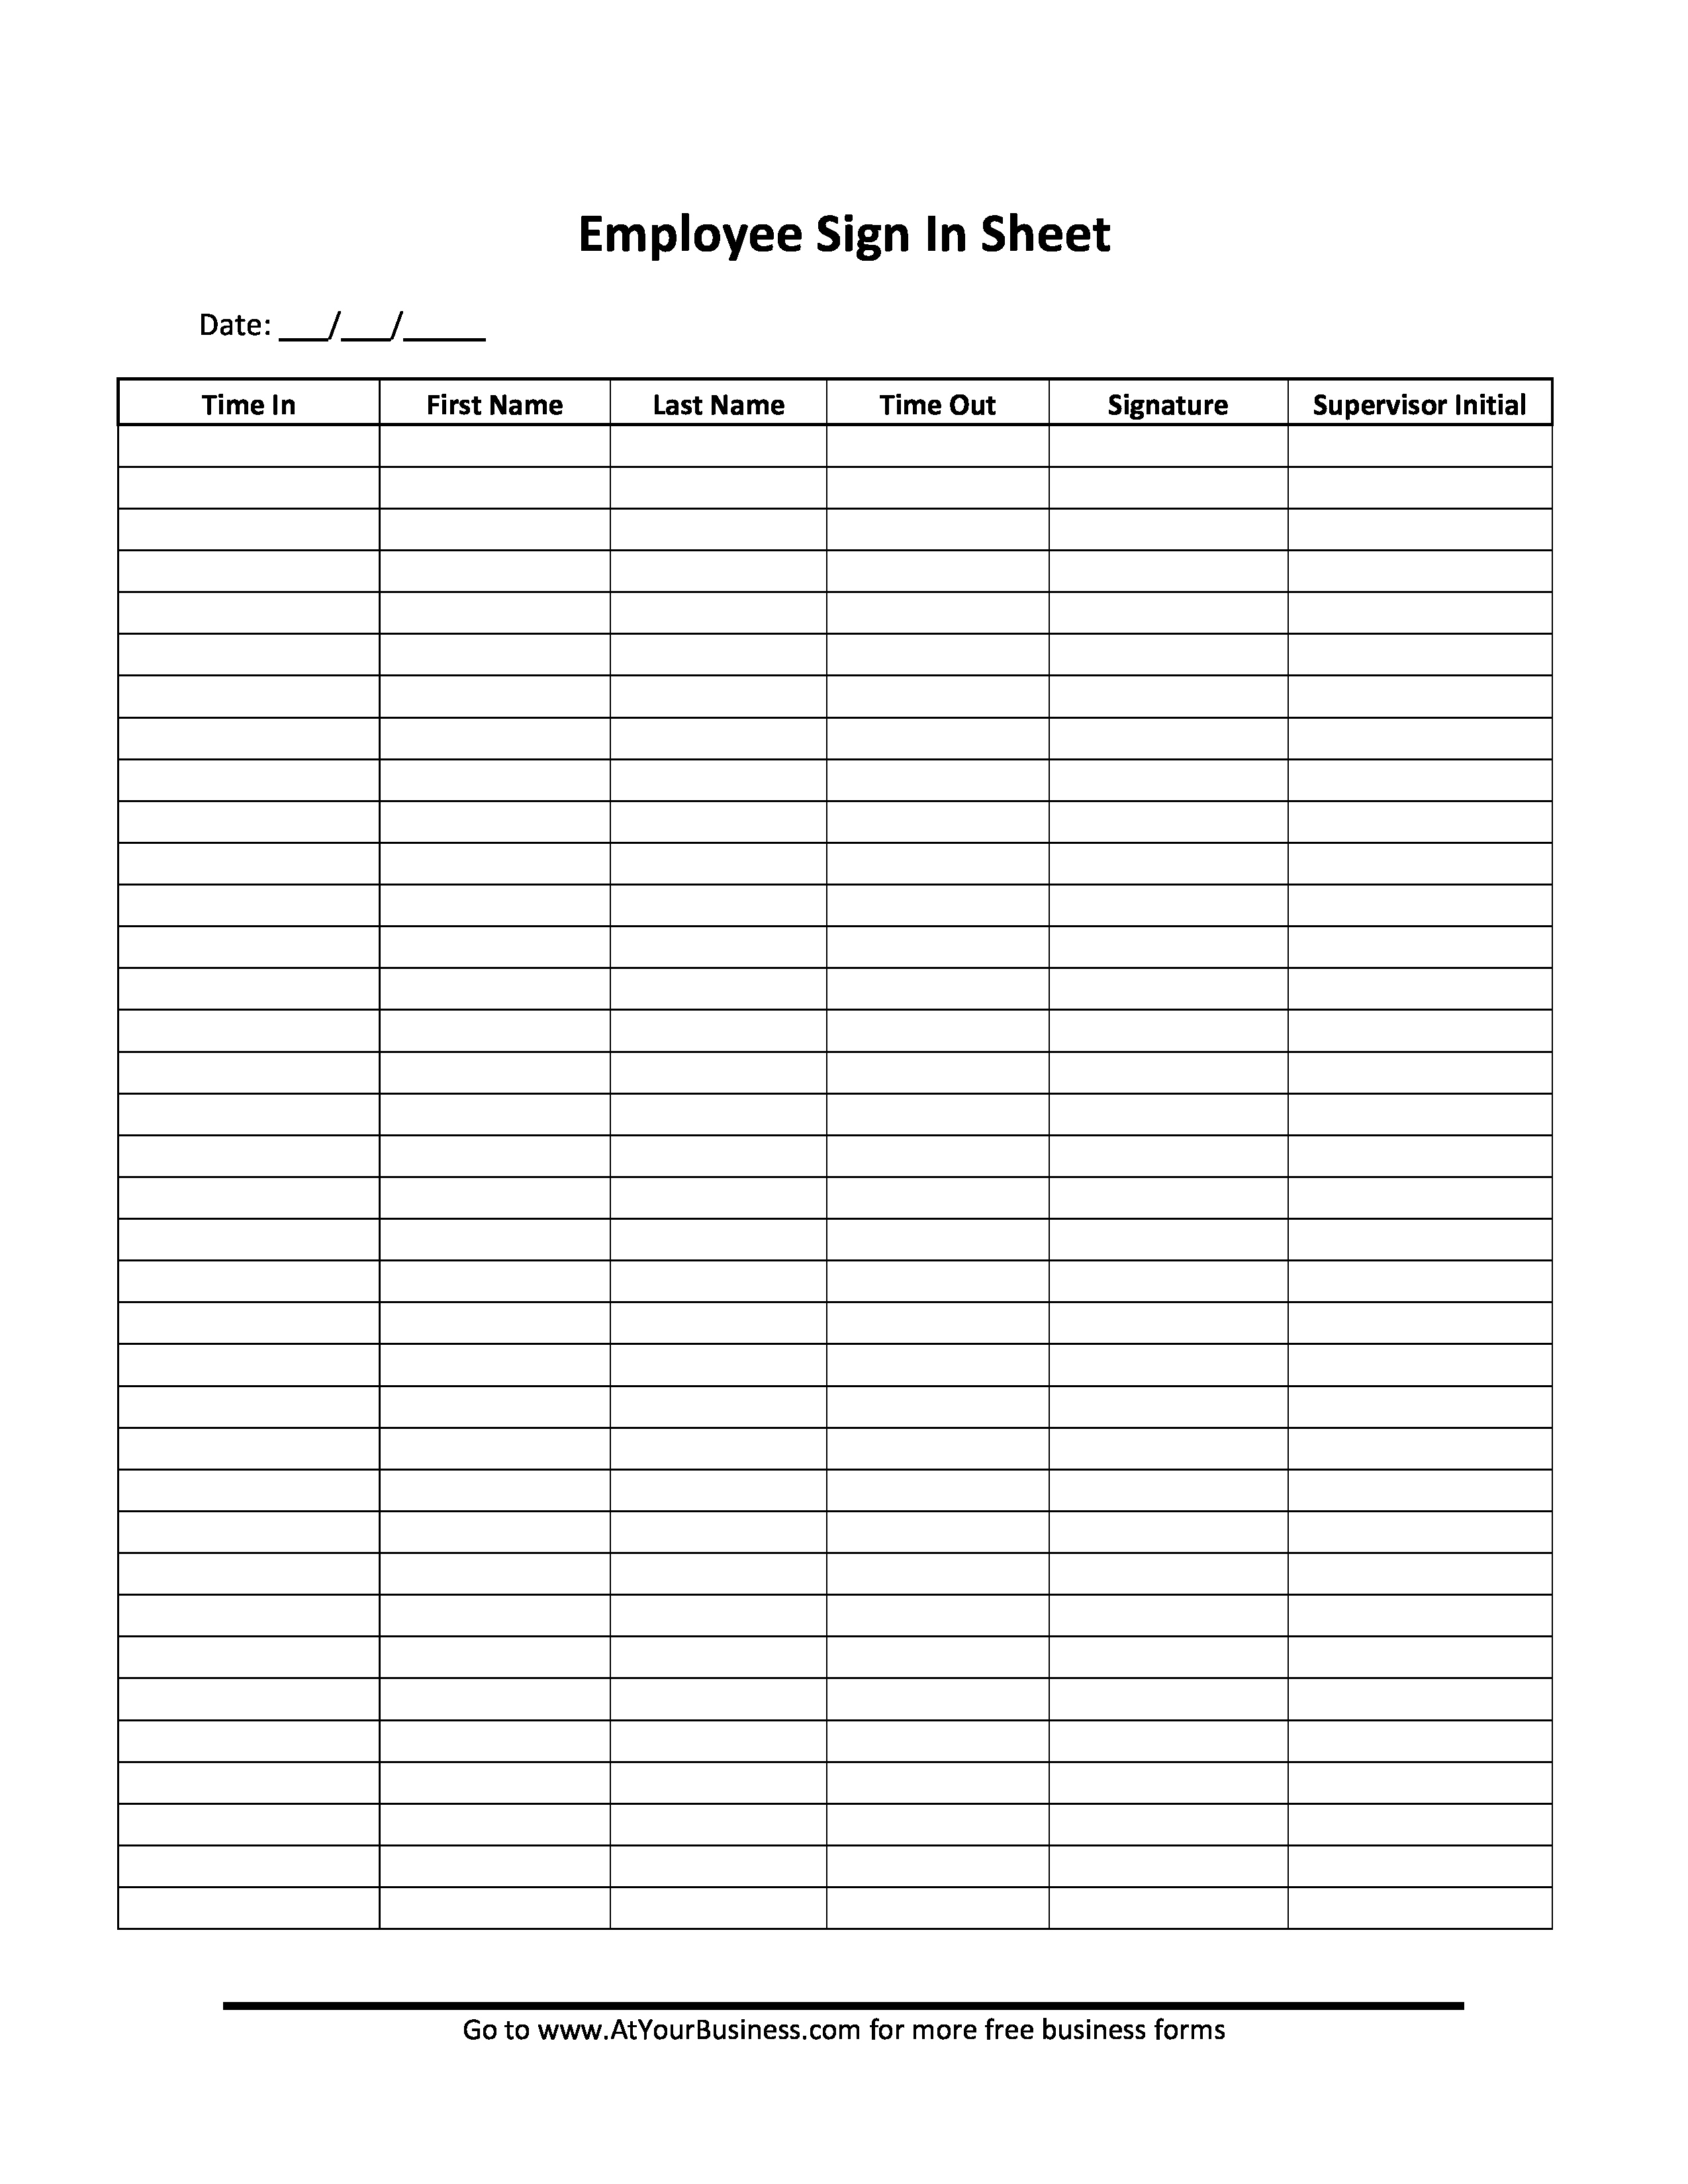 Staff Sign In Sheet Template Inspirational Free Daily Employee Sign In Sheet